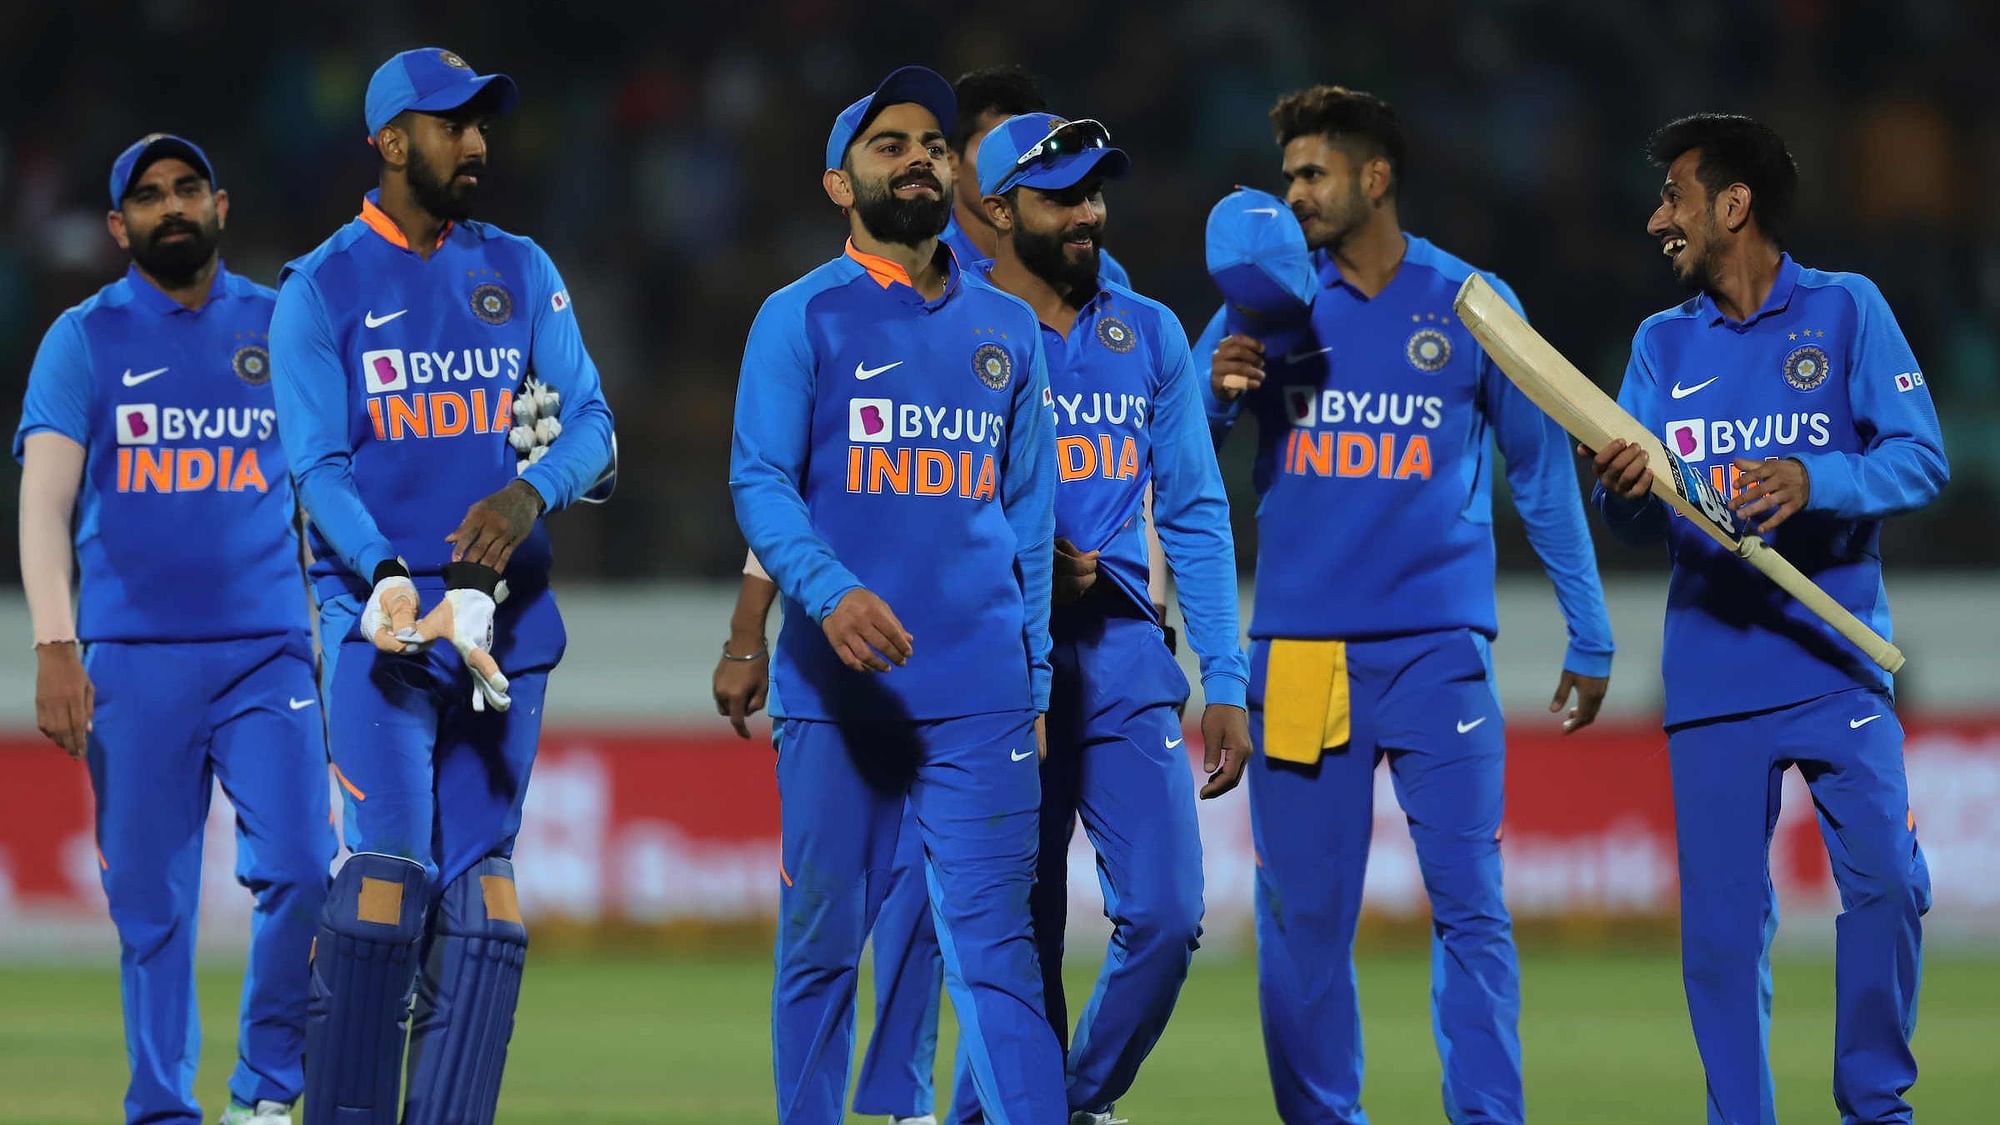 India bounced back in style as they beat Australia by 36 runs in the 2nd ODI in Rajkot to level the three-match series 1-1.